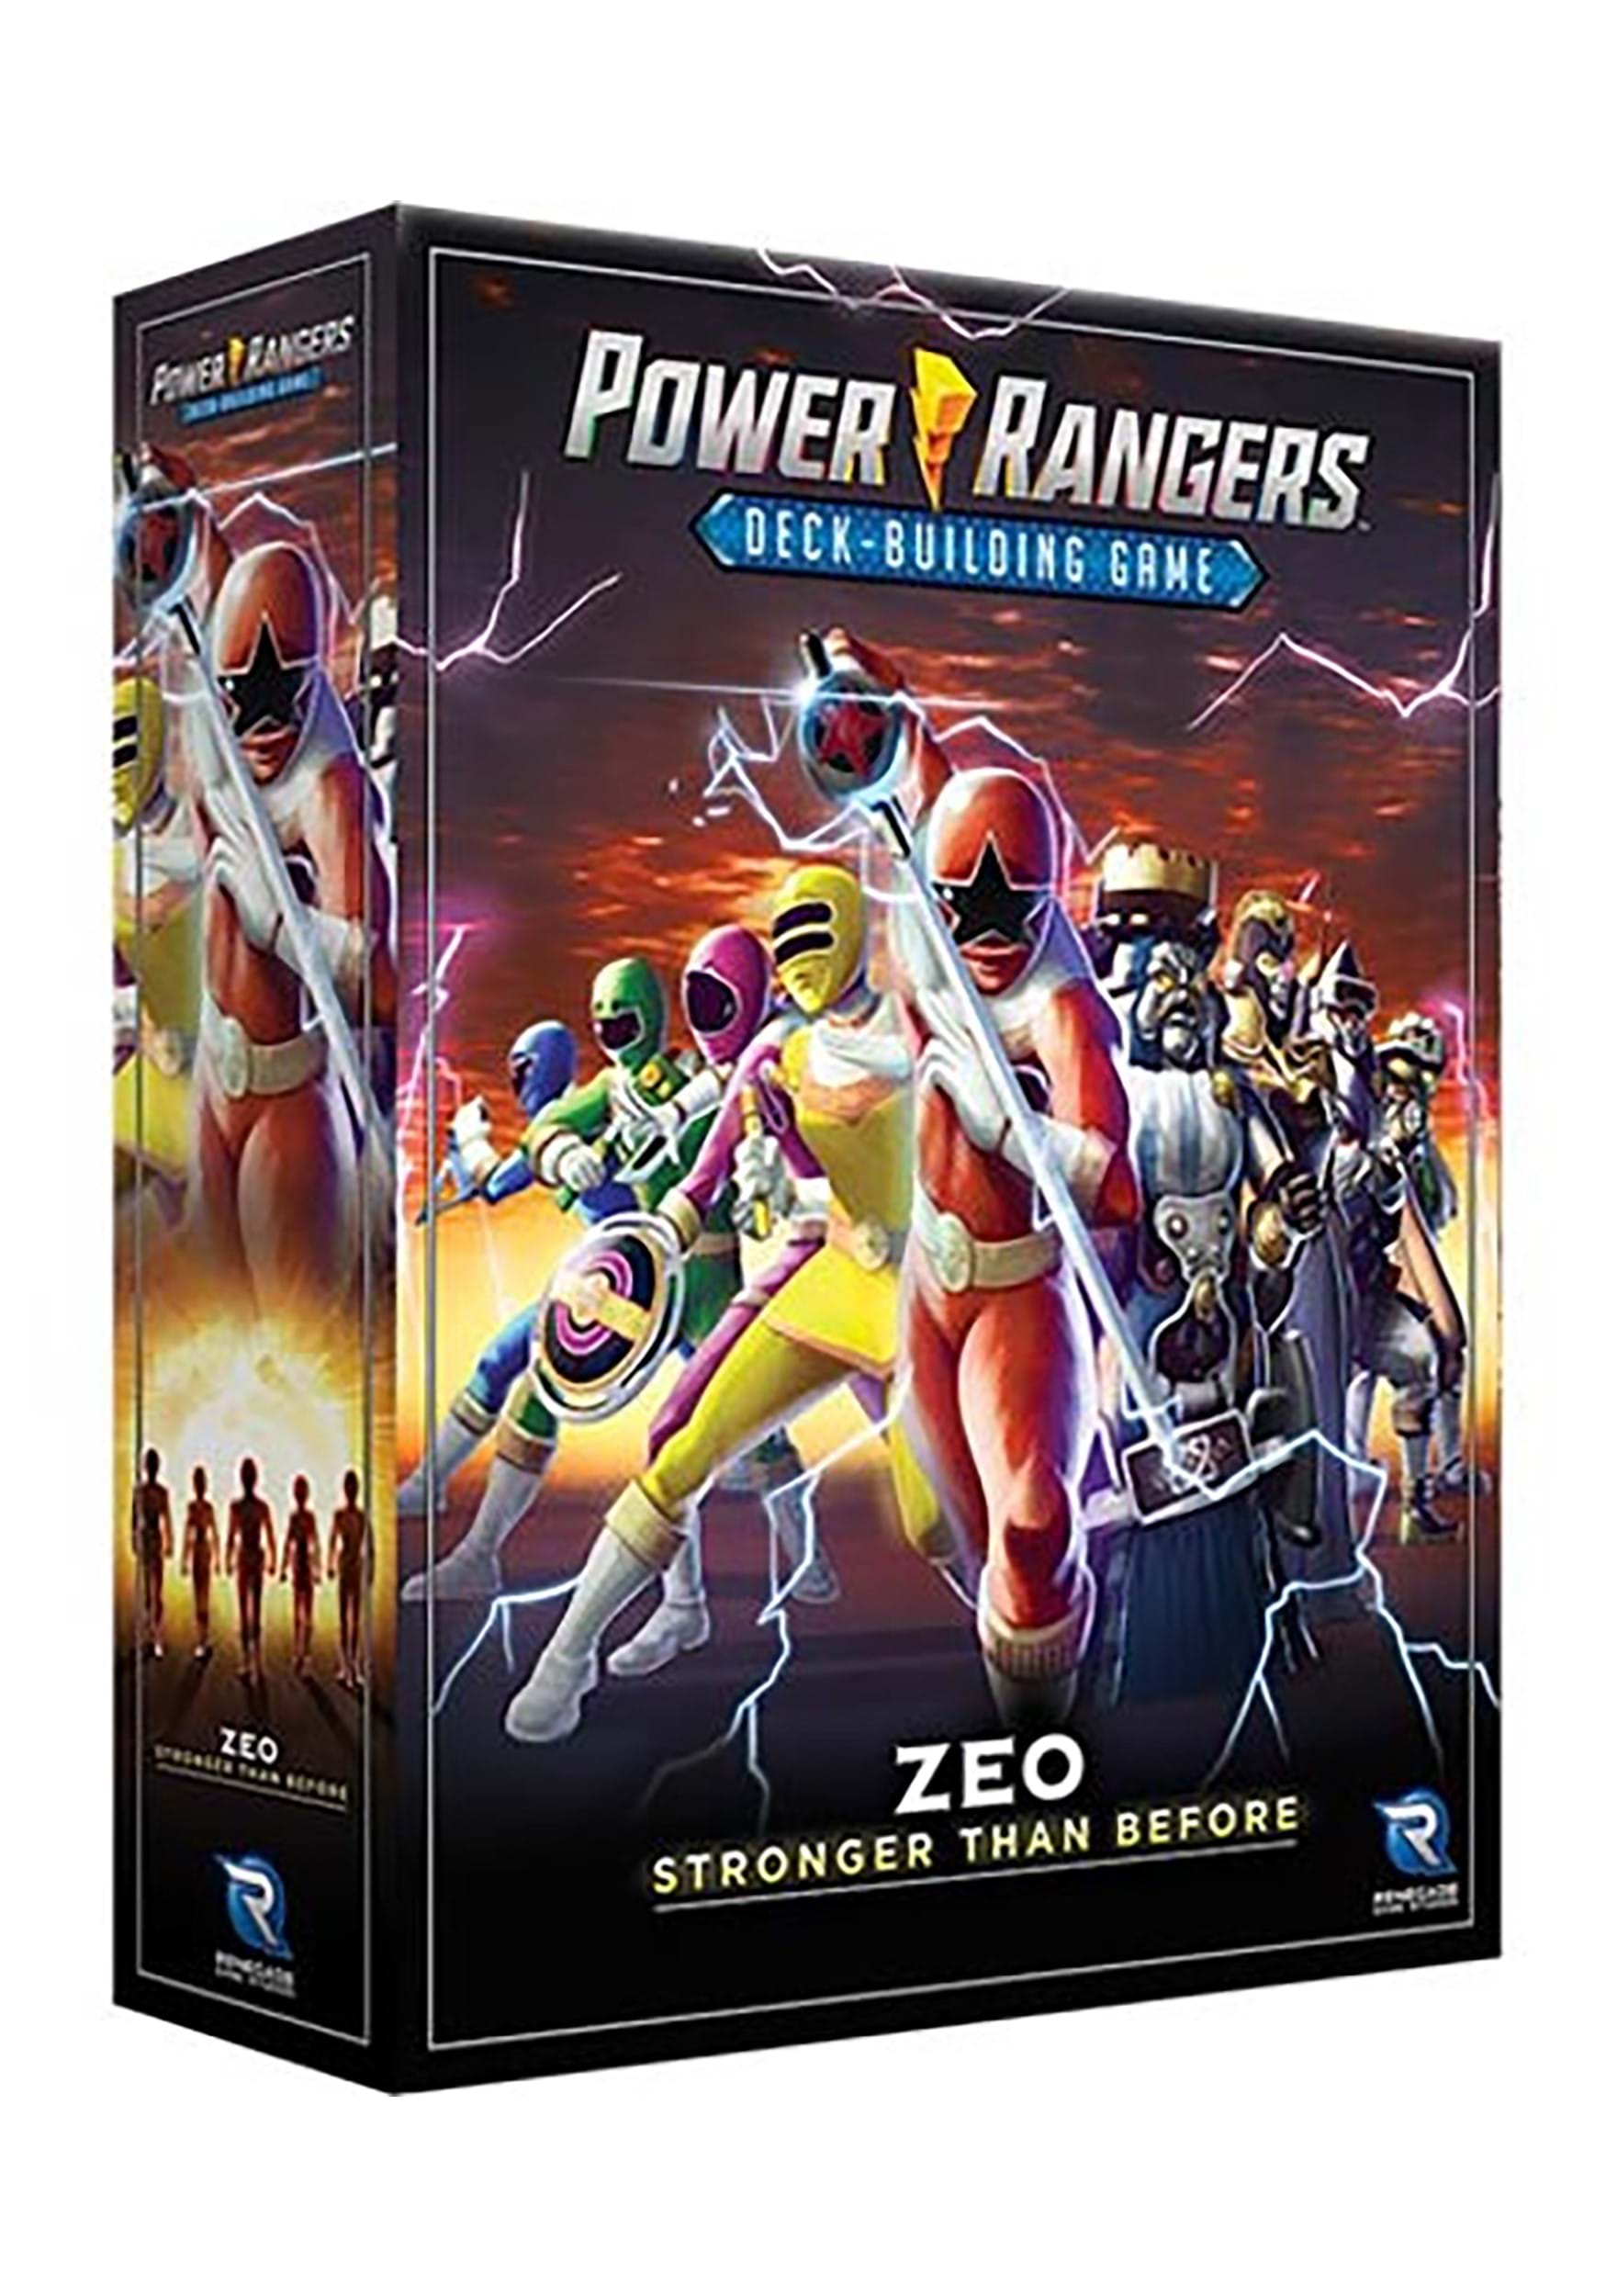 Power Rangers Deck-Building Game - Zeo - Stronger Than Before product image